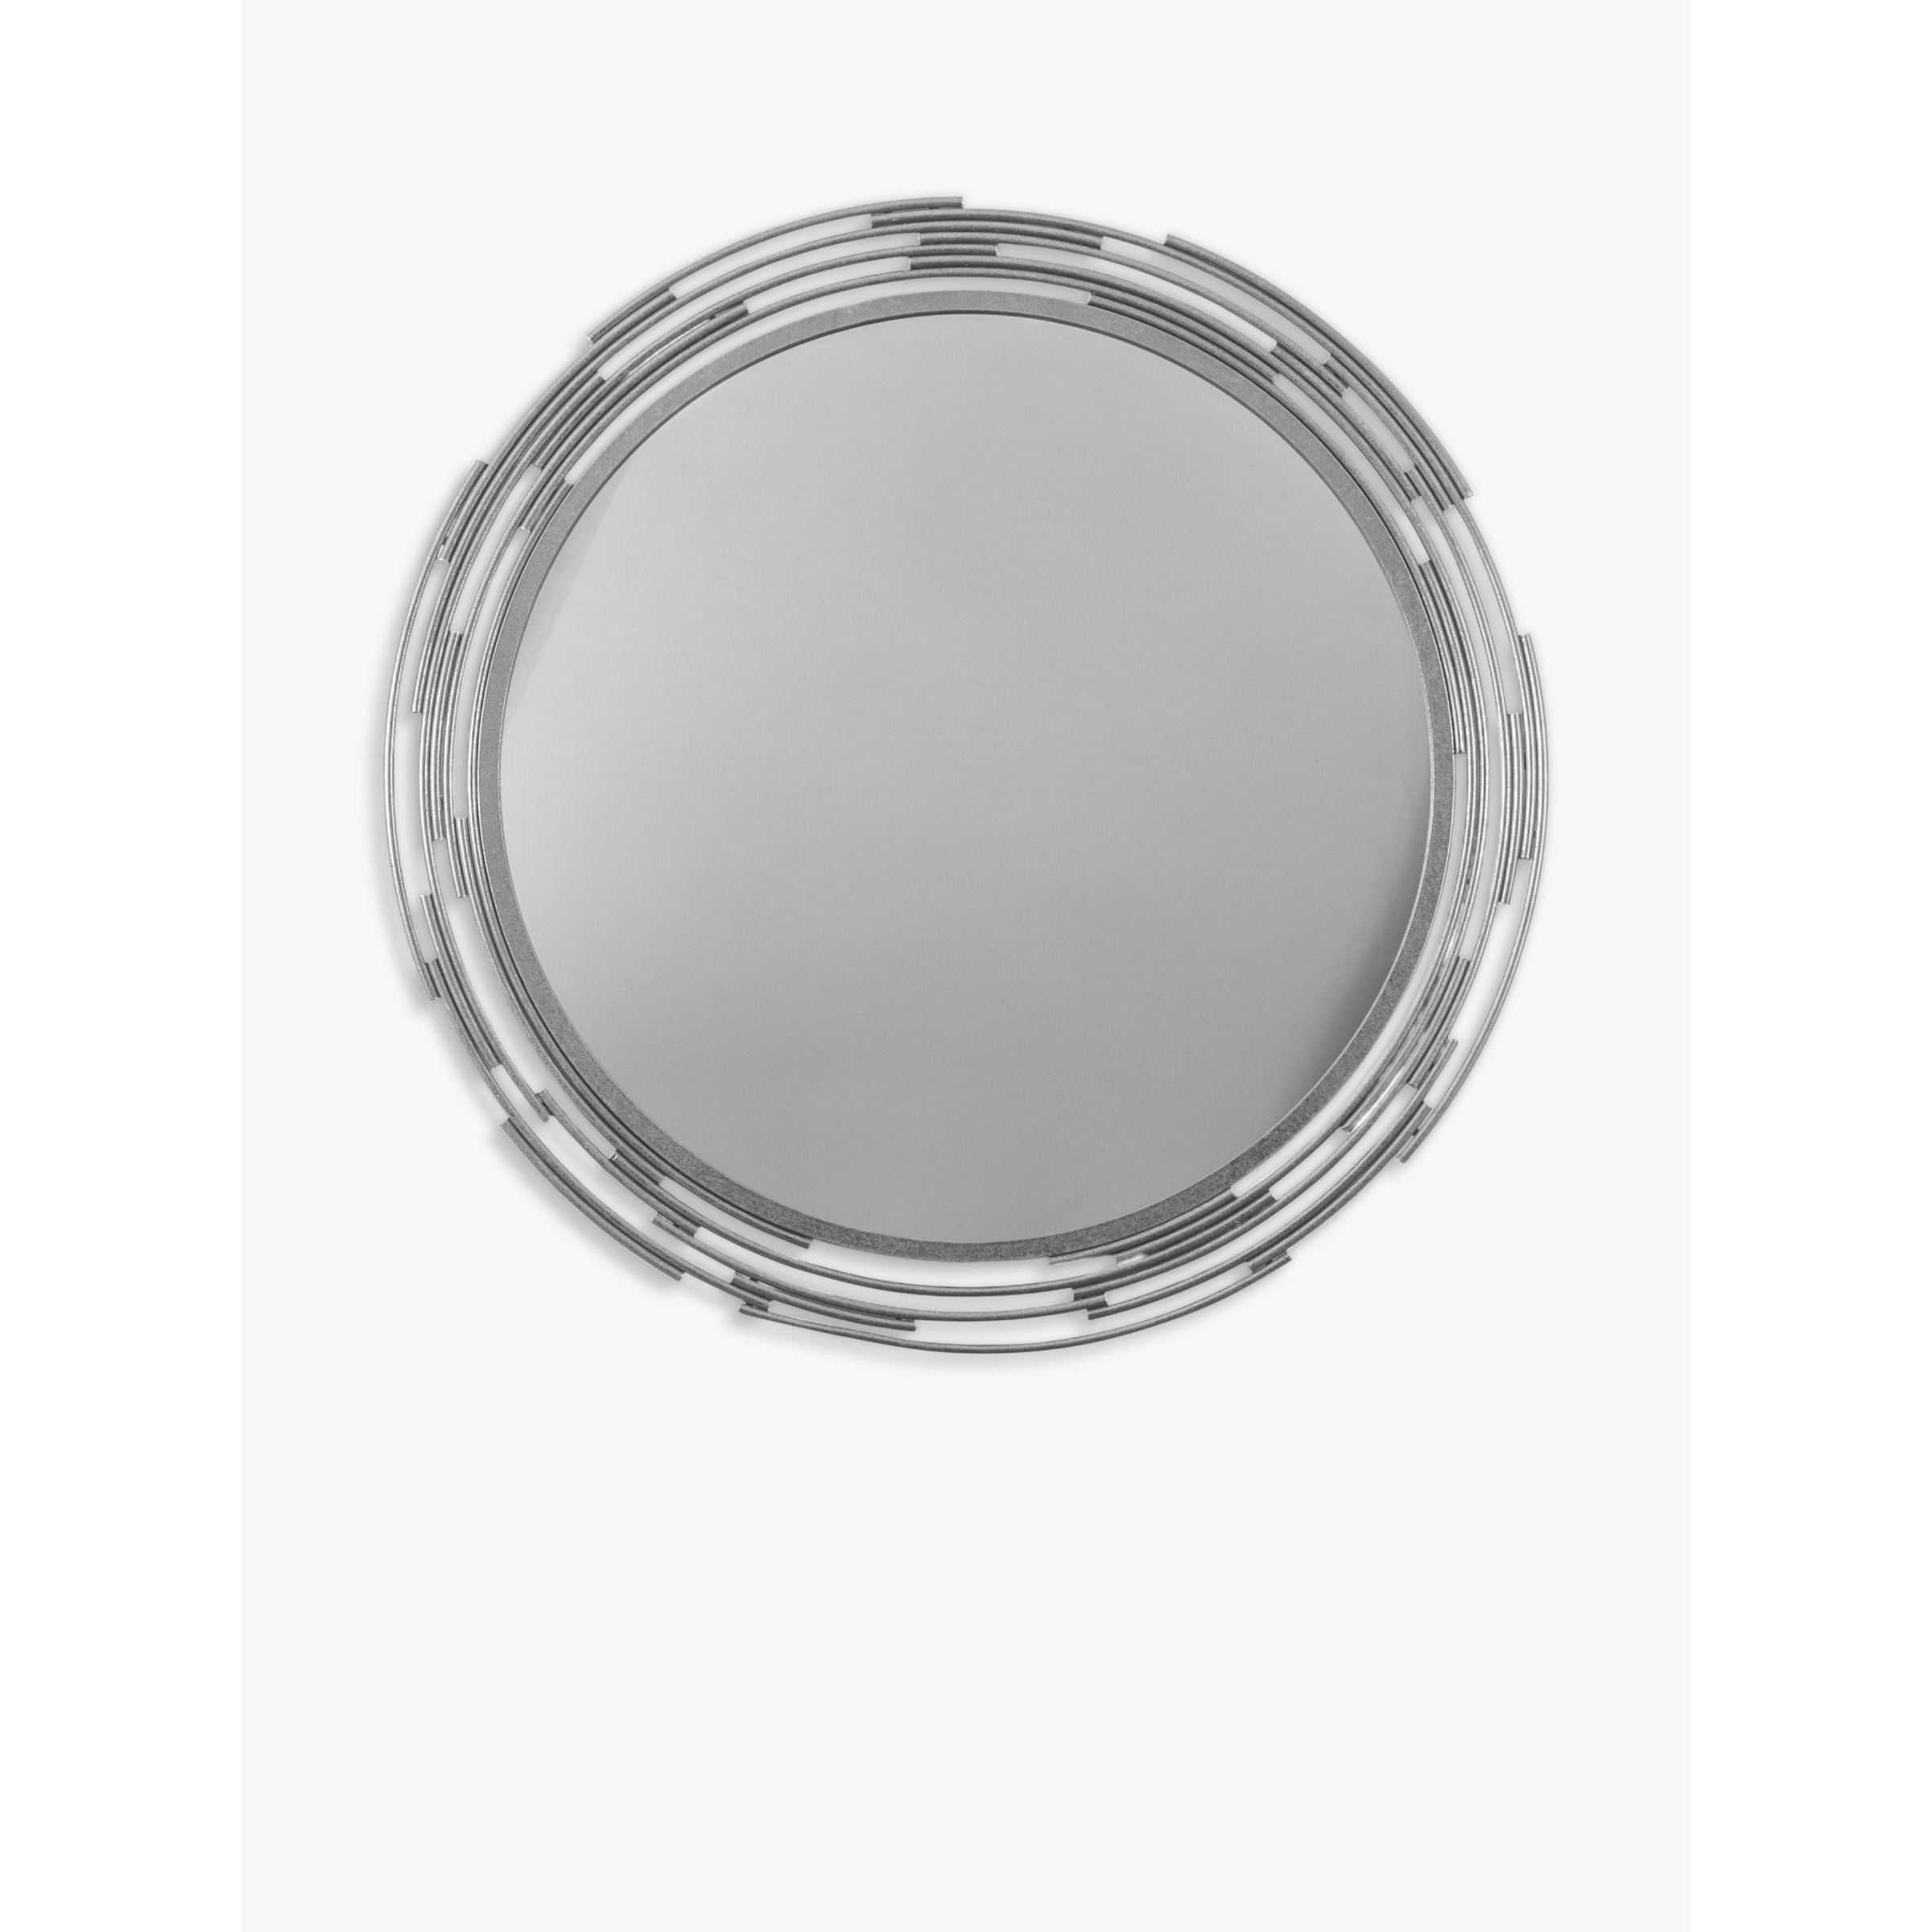 Gallery Direct Searcy Round Metal Frame Wall Mirror, 80cm - image 1